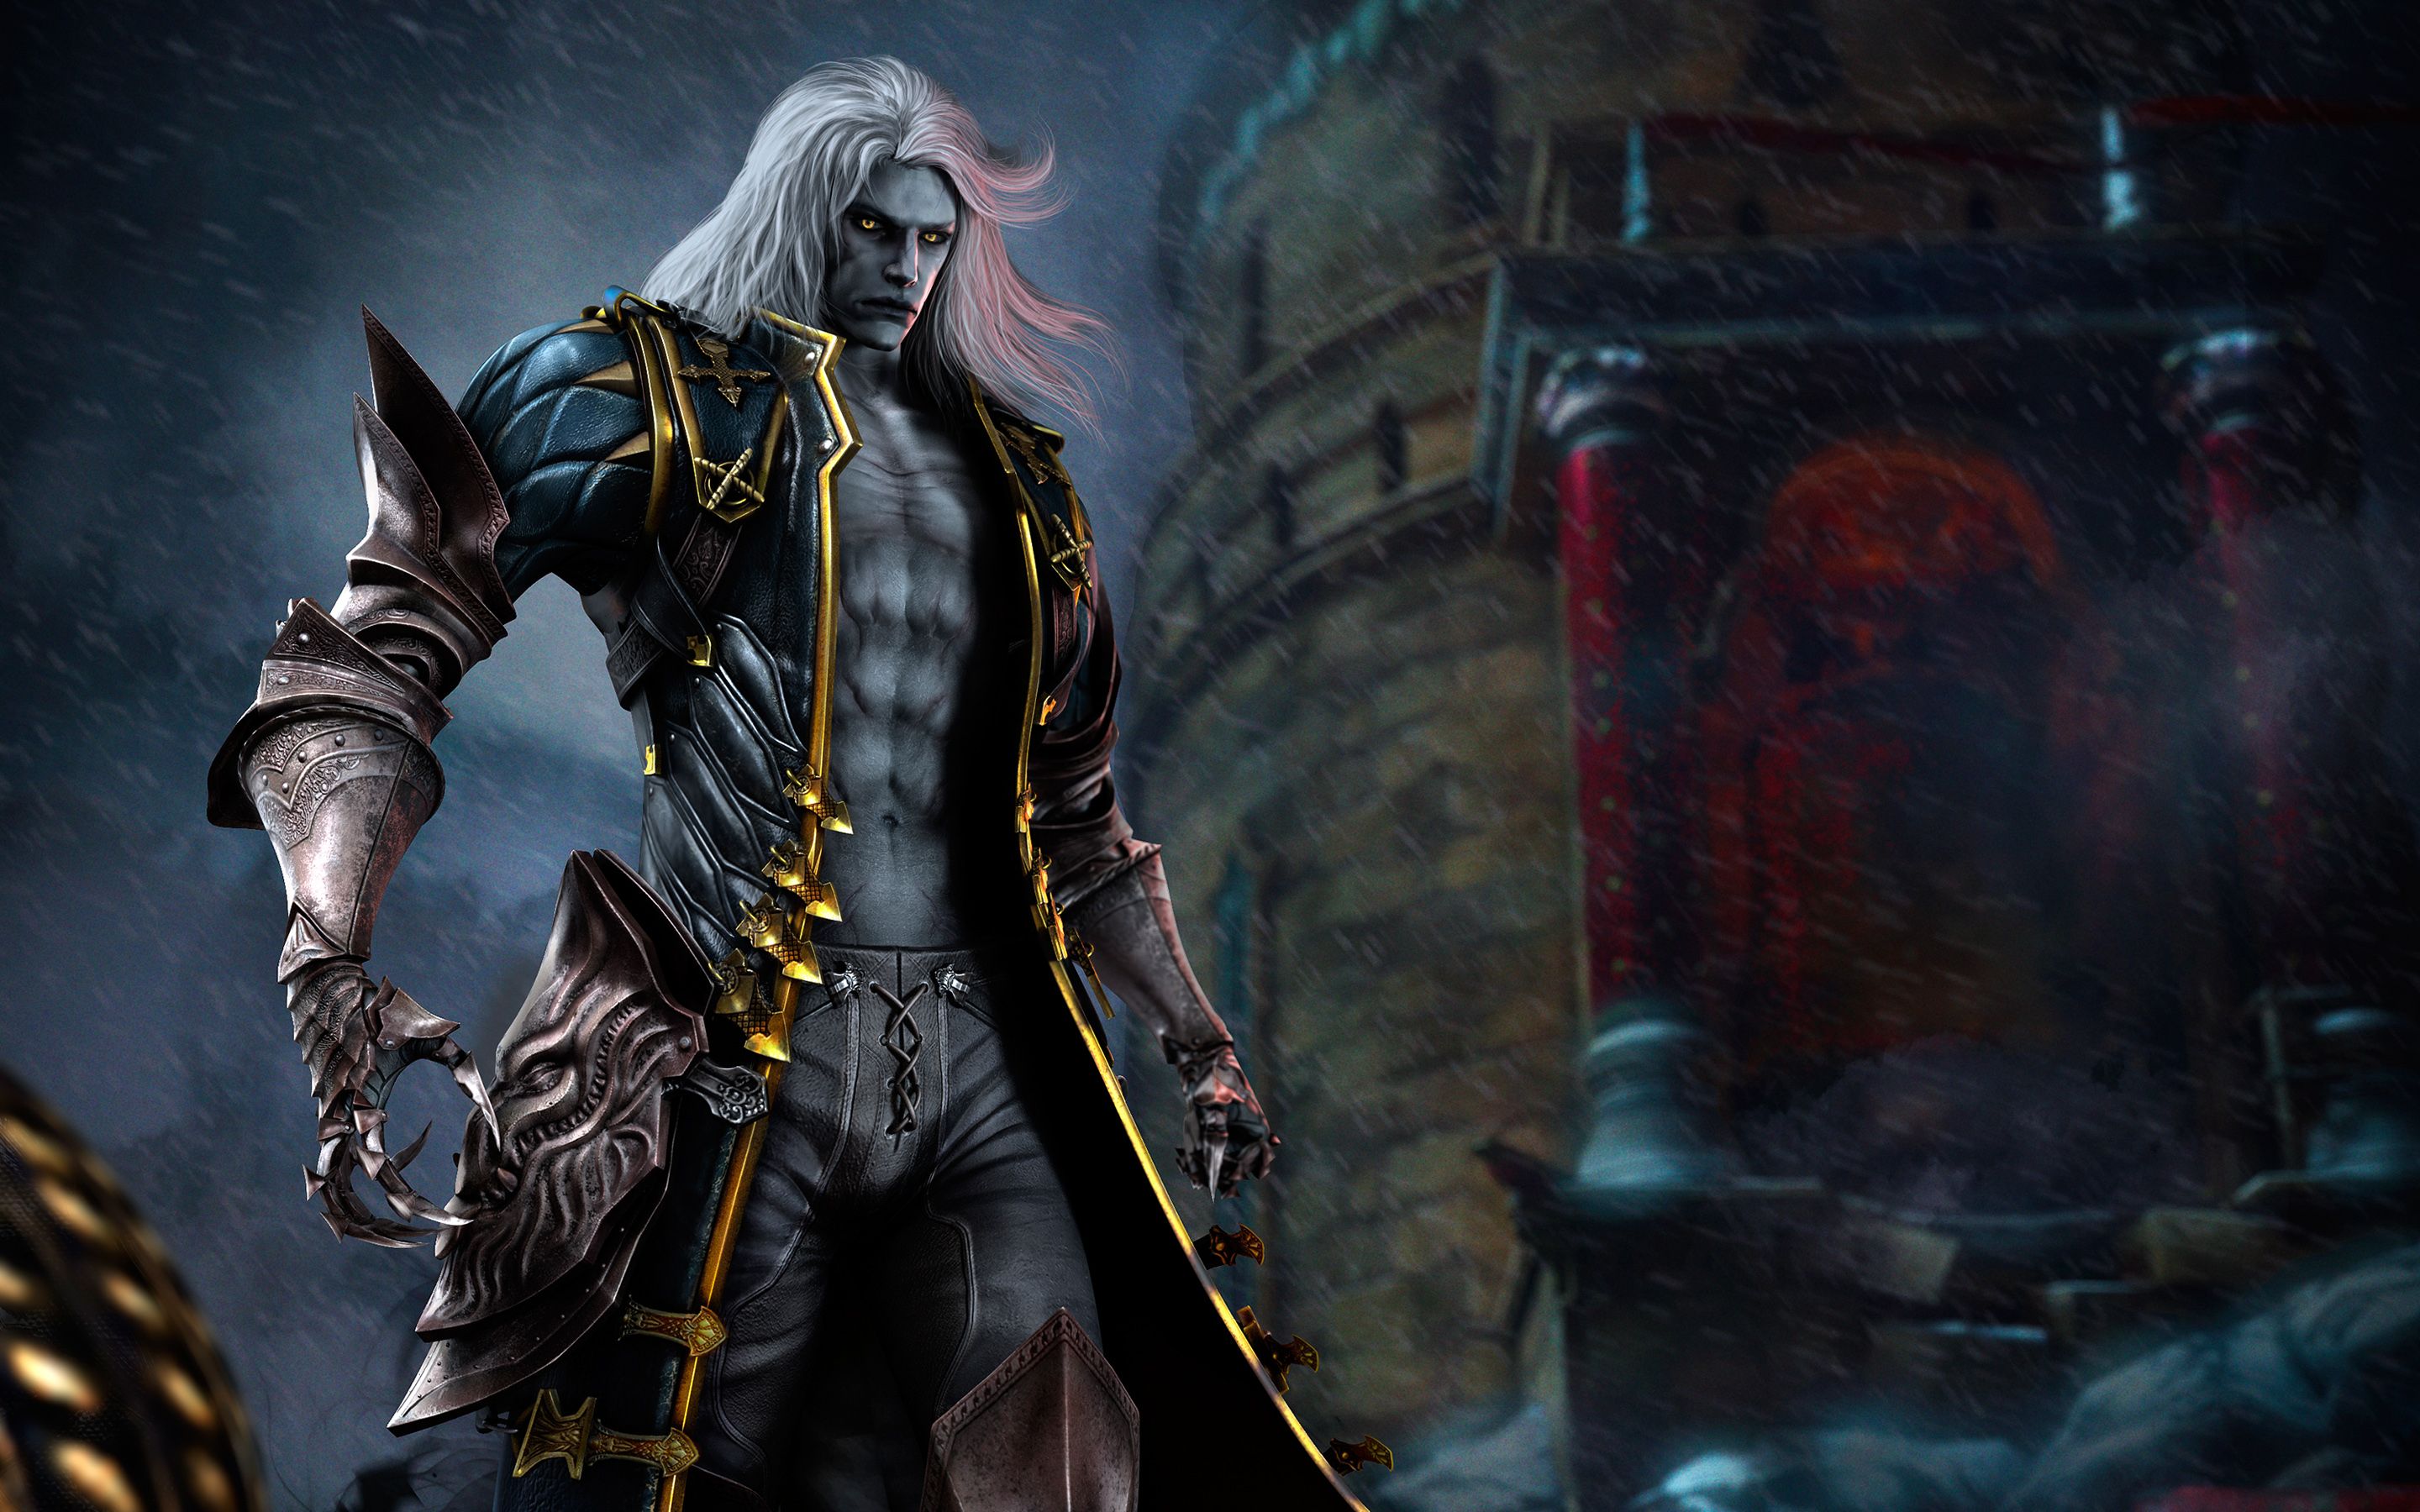 Castlevania 4K wallpaper for your desktop or mobile screen free and easy to download